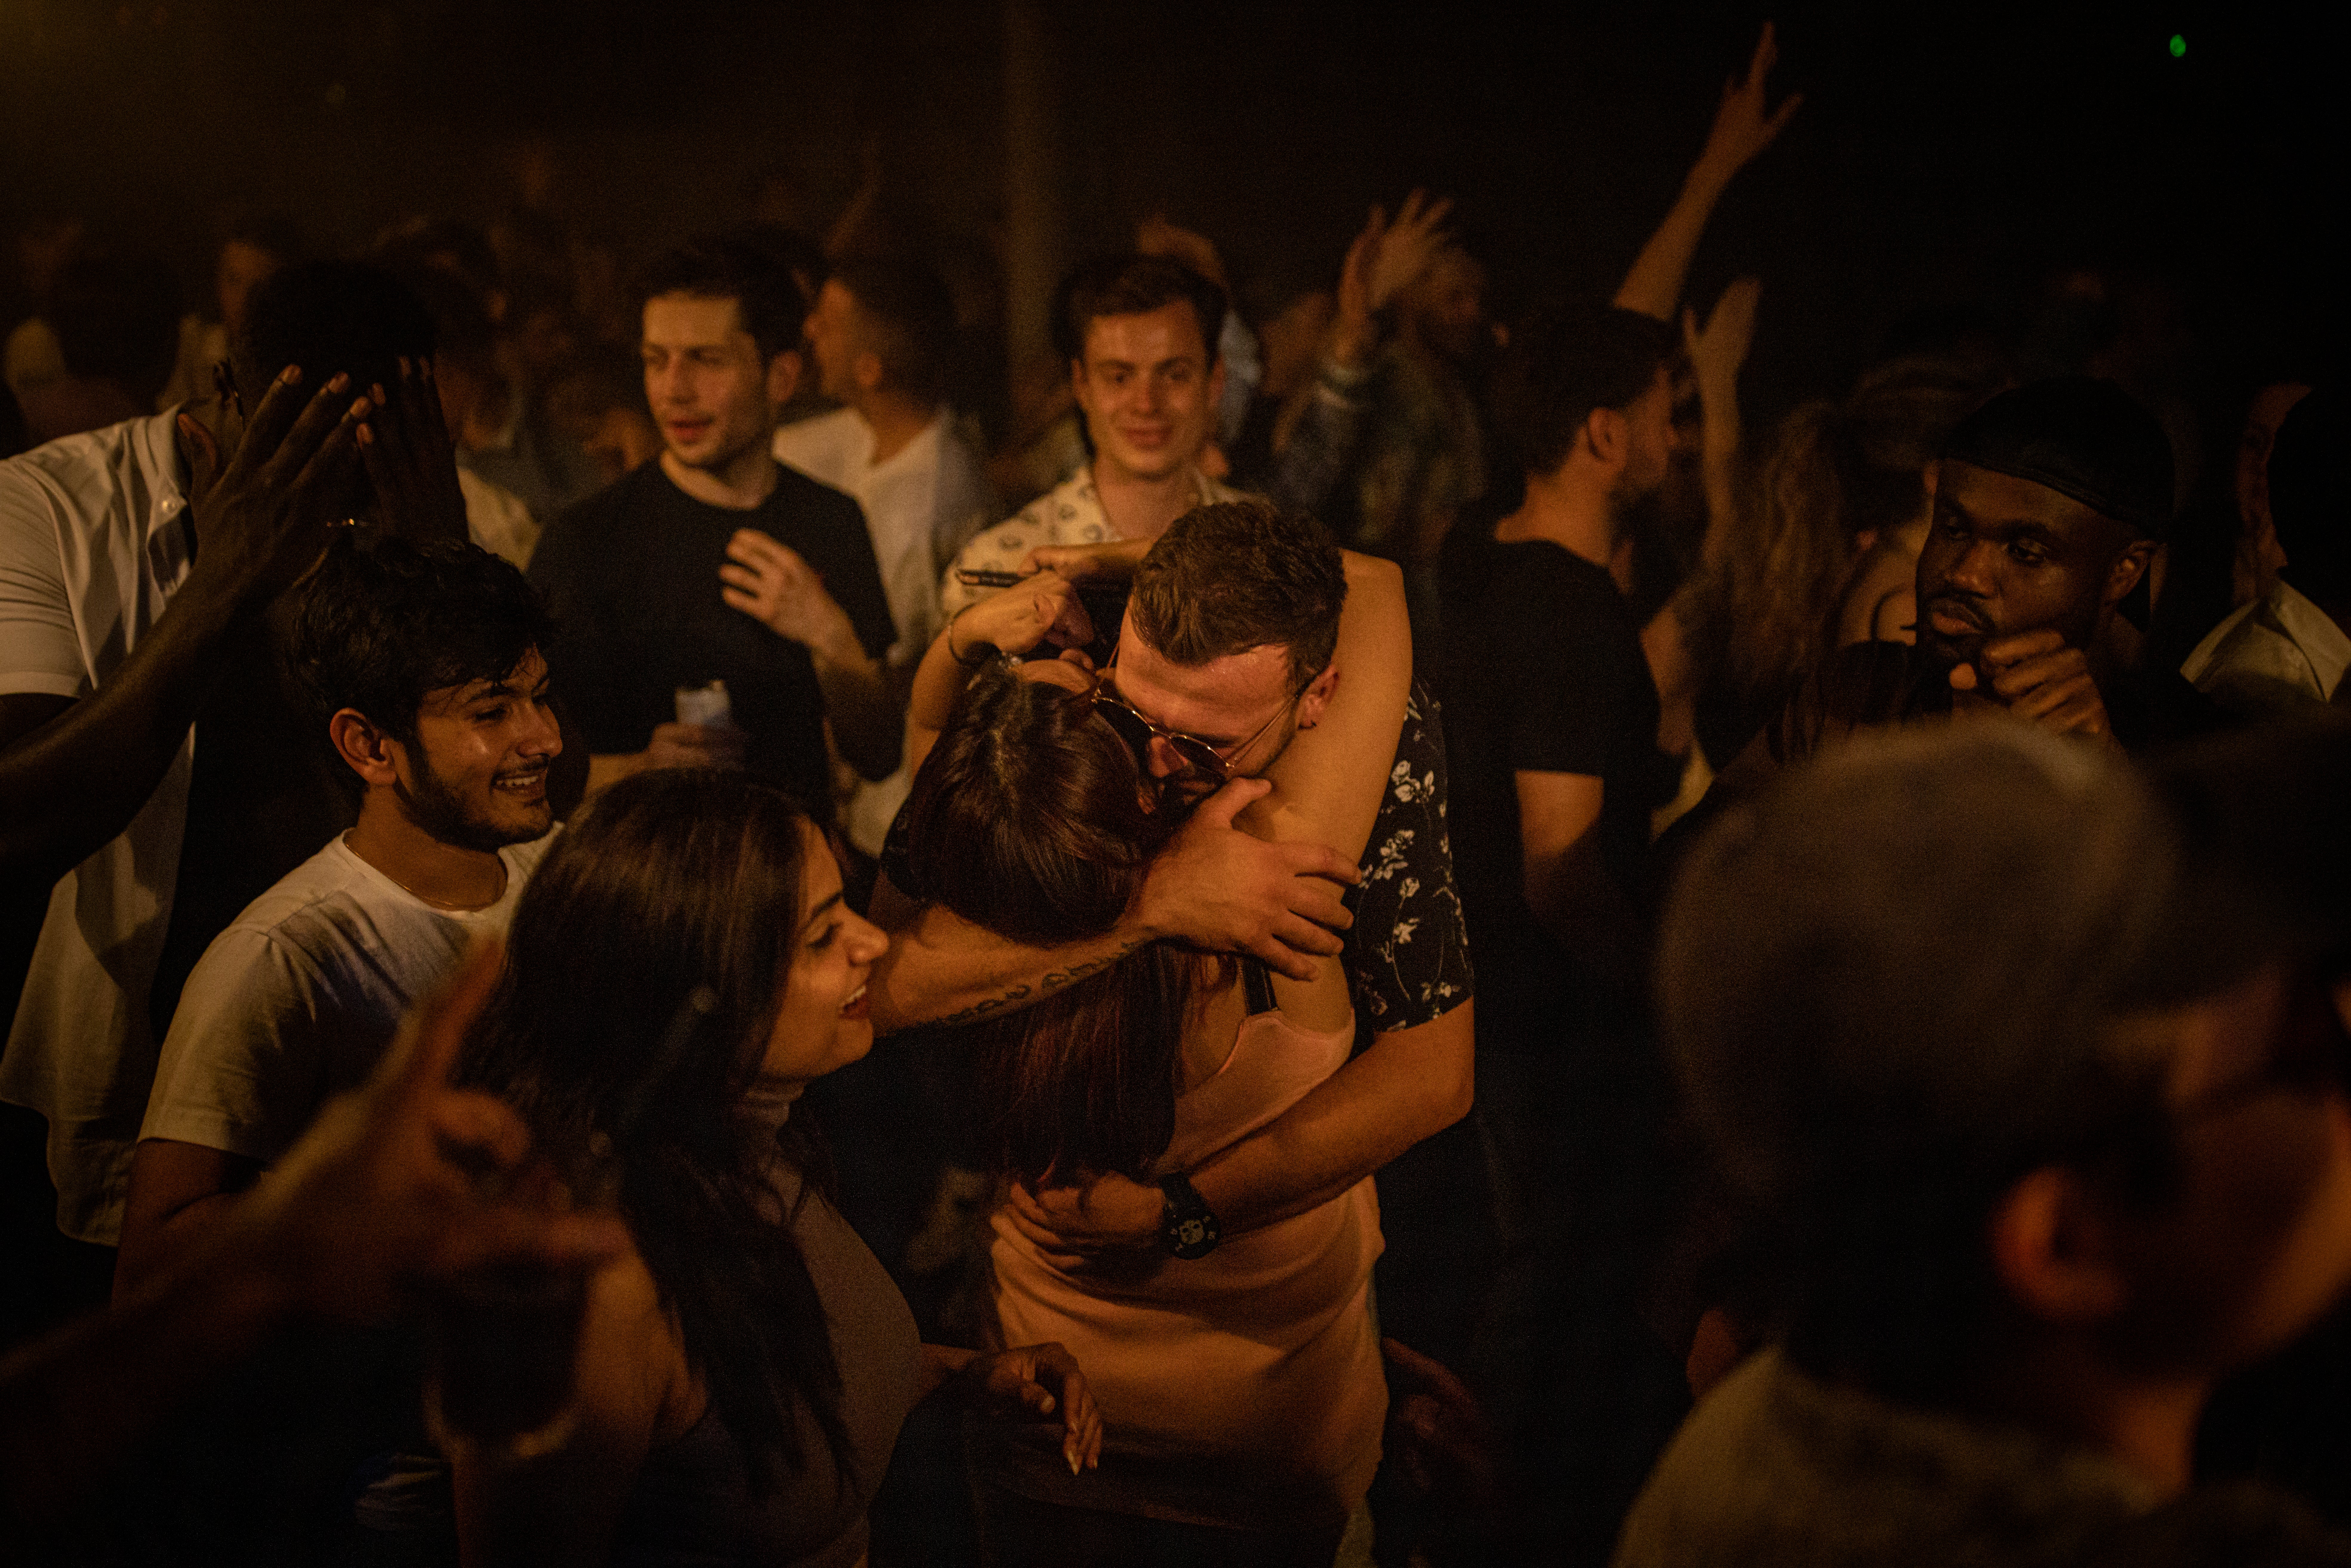 Two people hug in the middle of the dancefloor at Egg London on ‘freedom day’